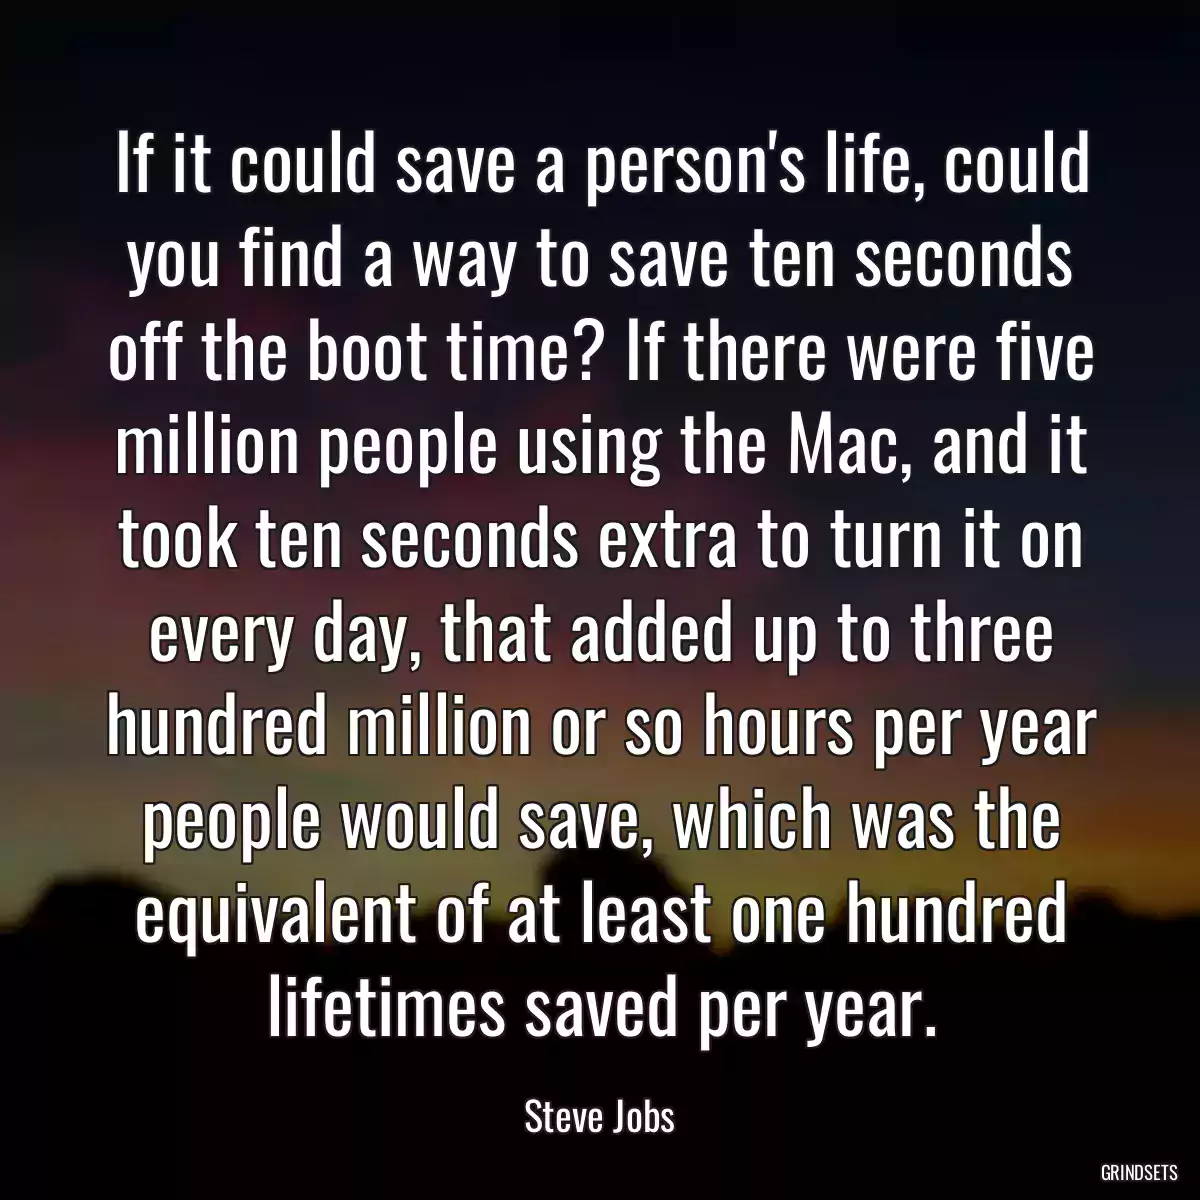 If it could save a person\'s life, could you find a way to save ten seconds off the boot time? If there were five million people using the Mac, and it took ten seconds extra to turn it on every day, that added up to three hundred million or so hours per year people would save, which was the equivalent of at least one hundred lifetimes saved per year.